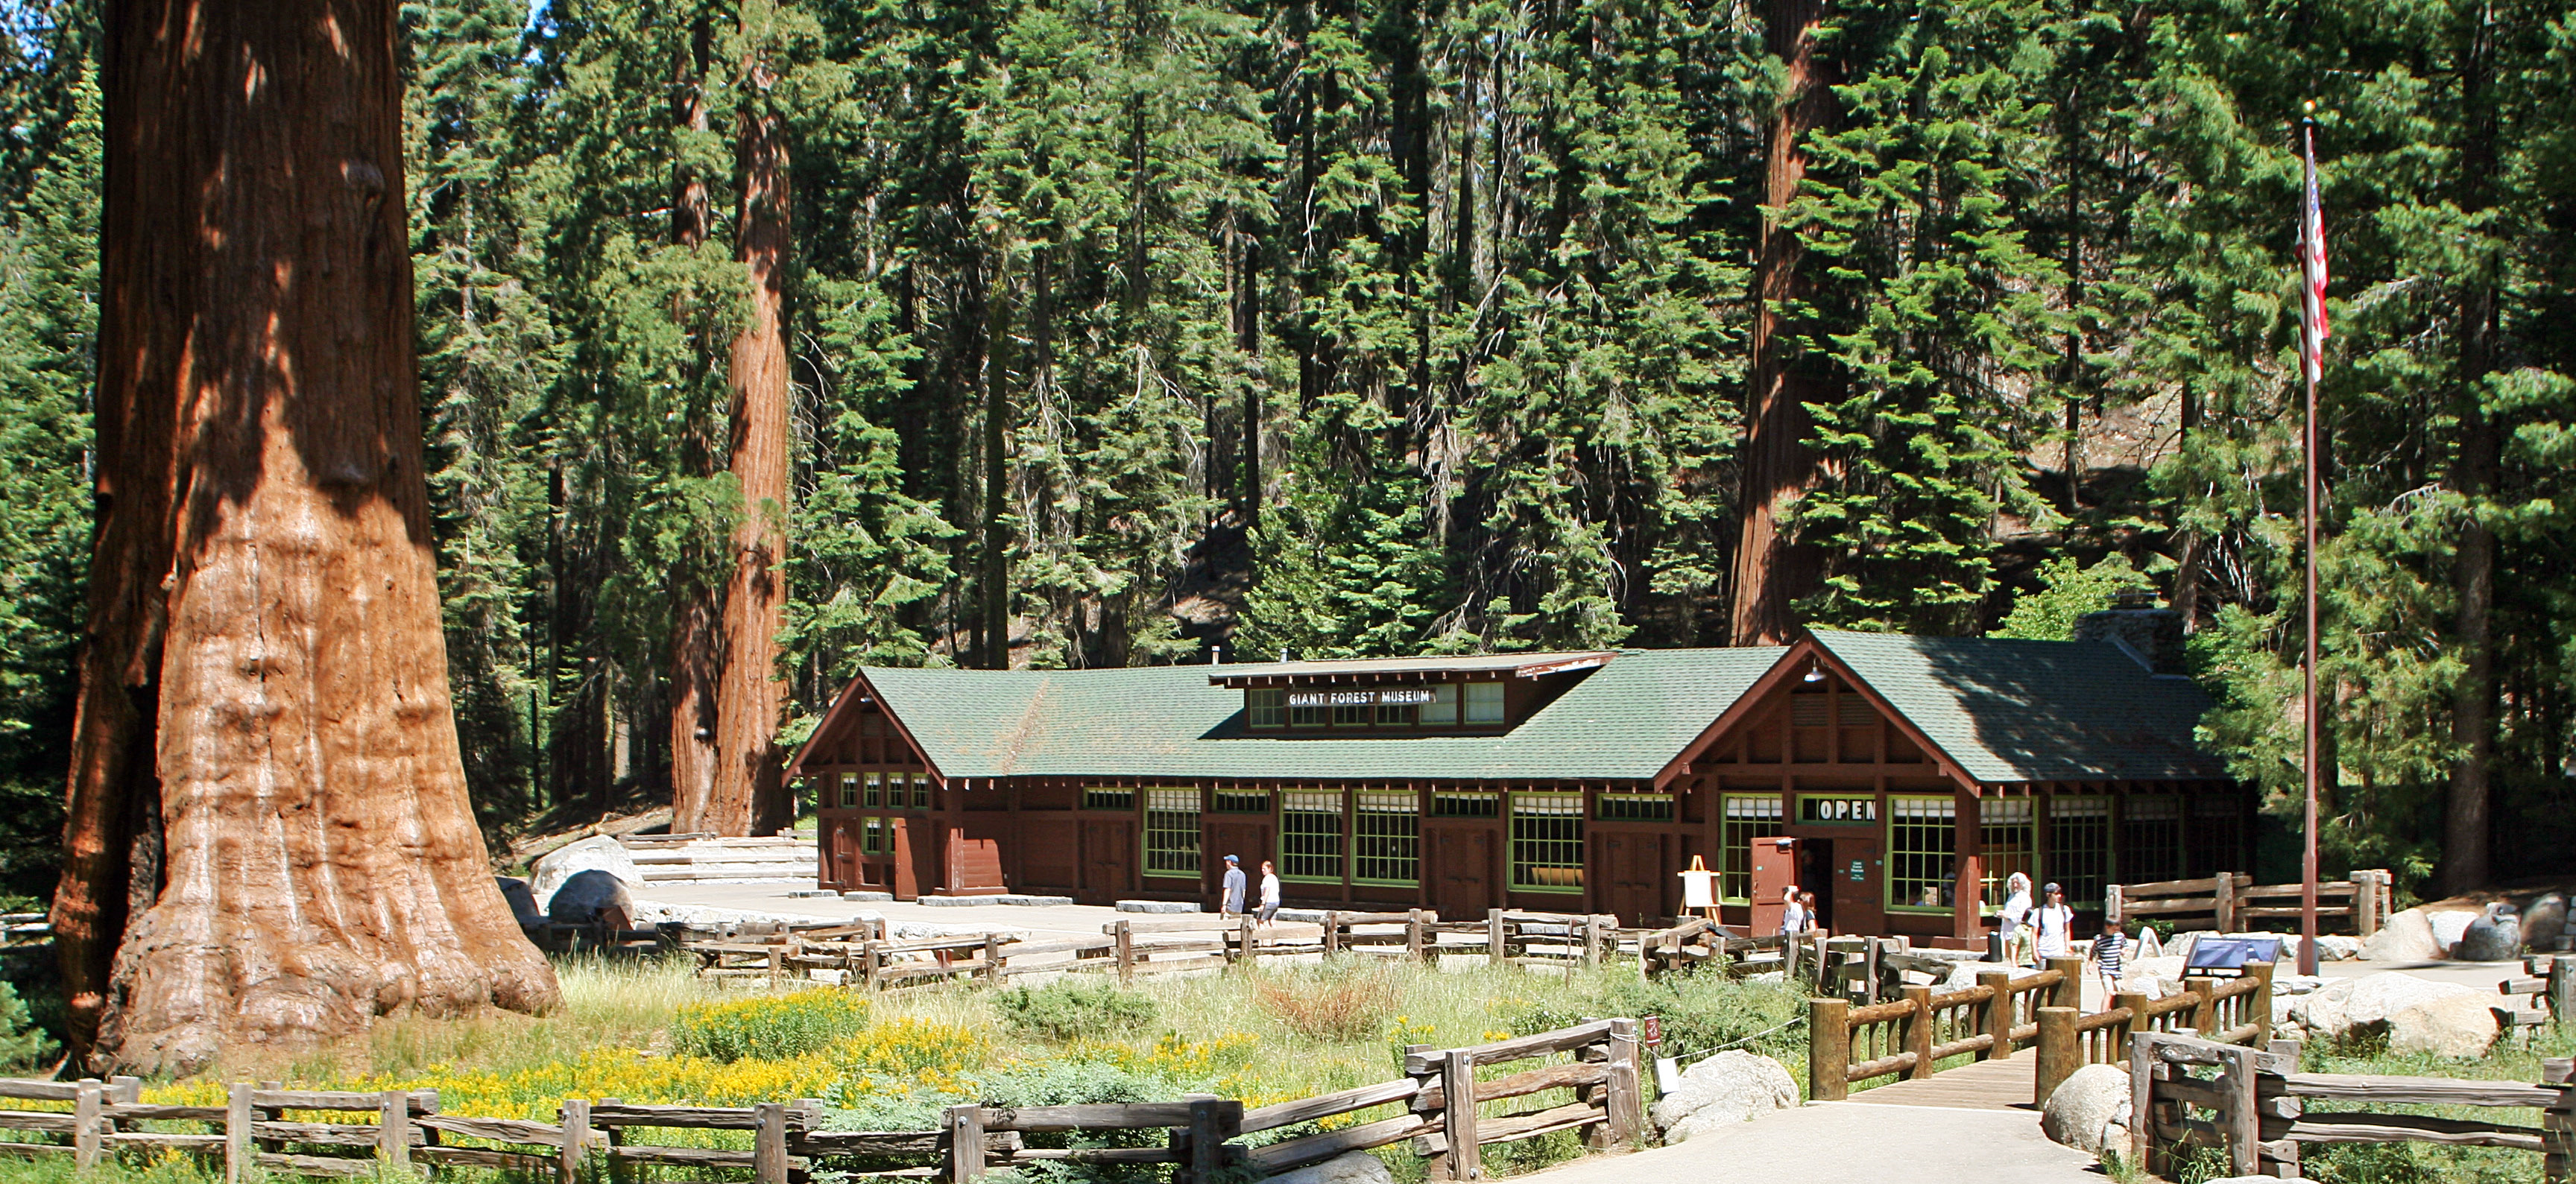 Giant Forest Museum offers exhibits about the natural history of giant sequoias.